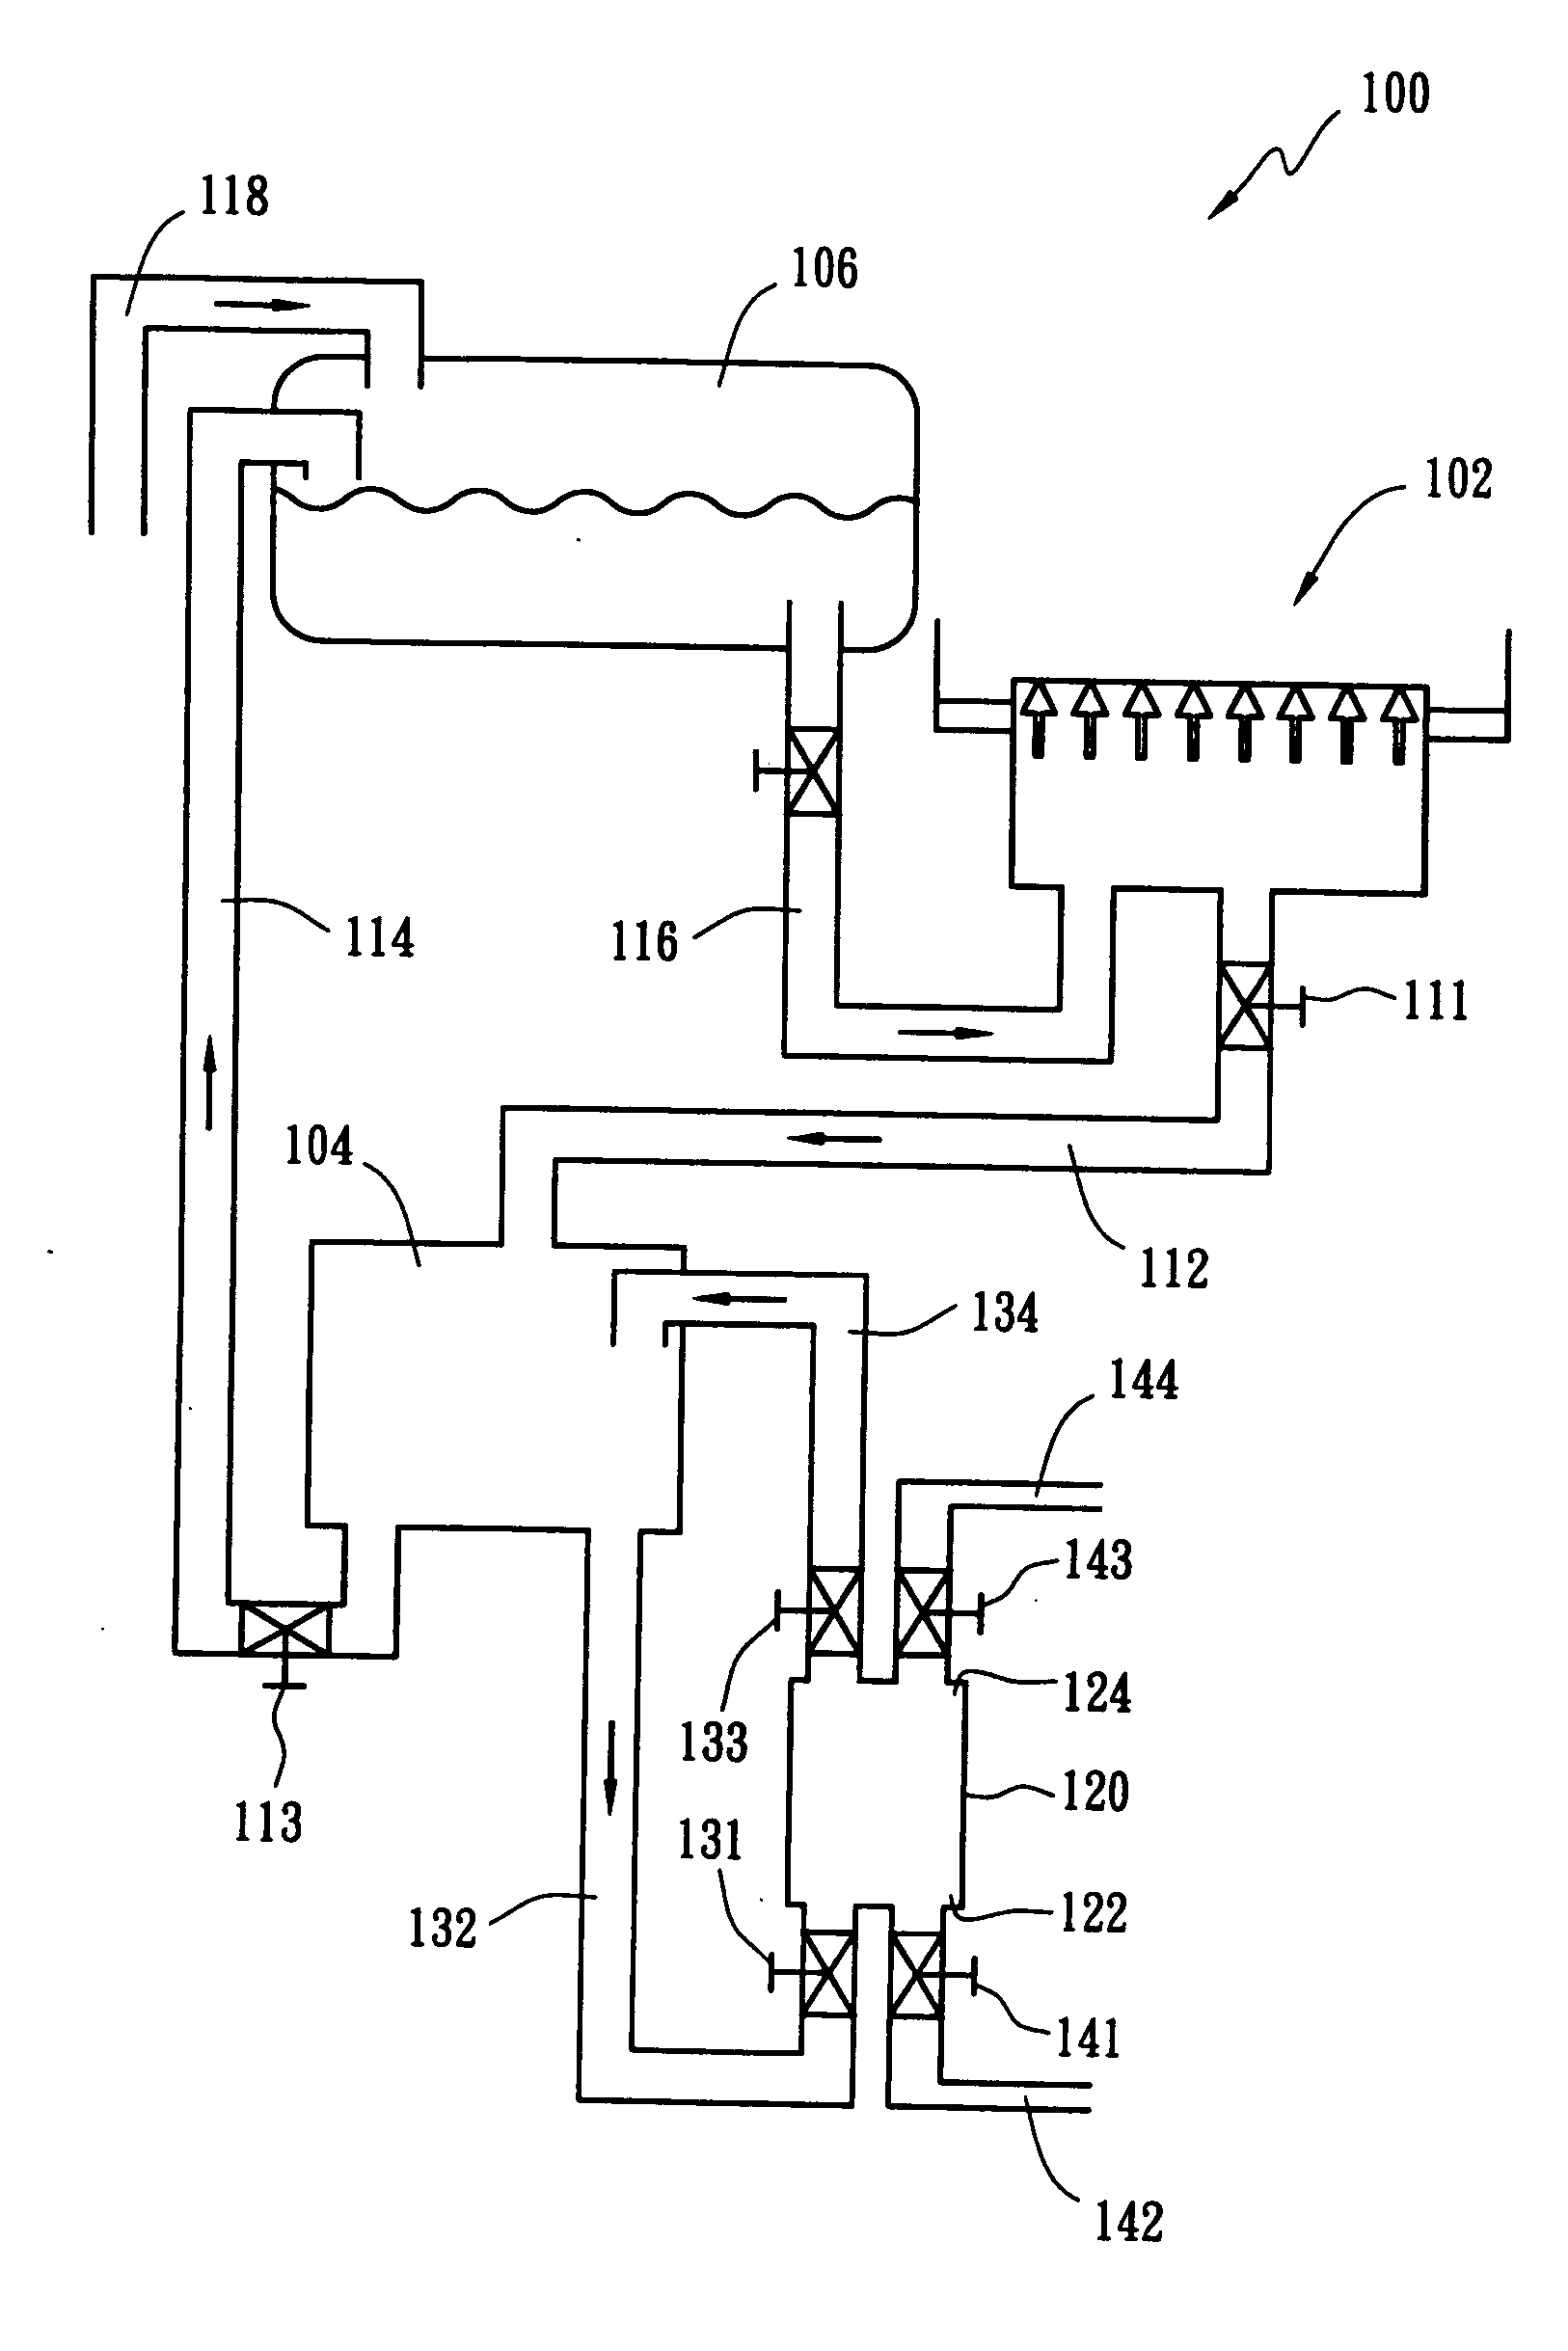 Method for treating the etching solution